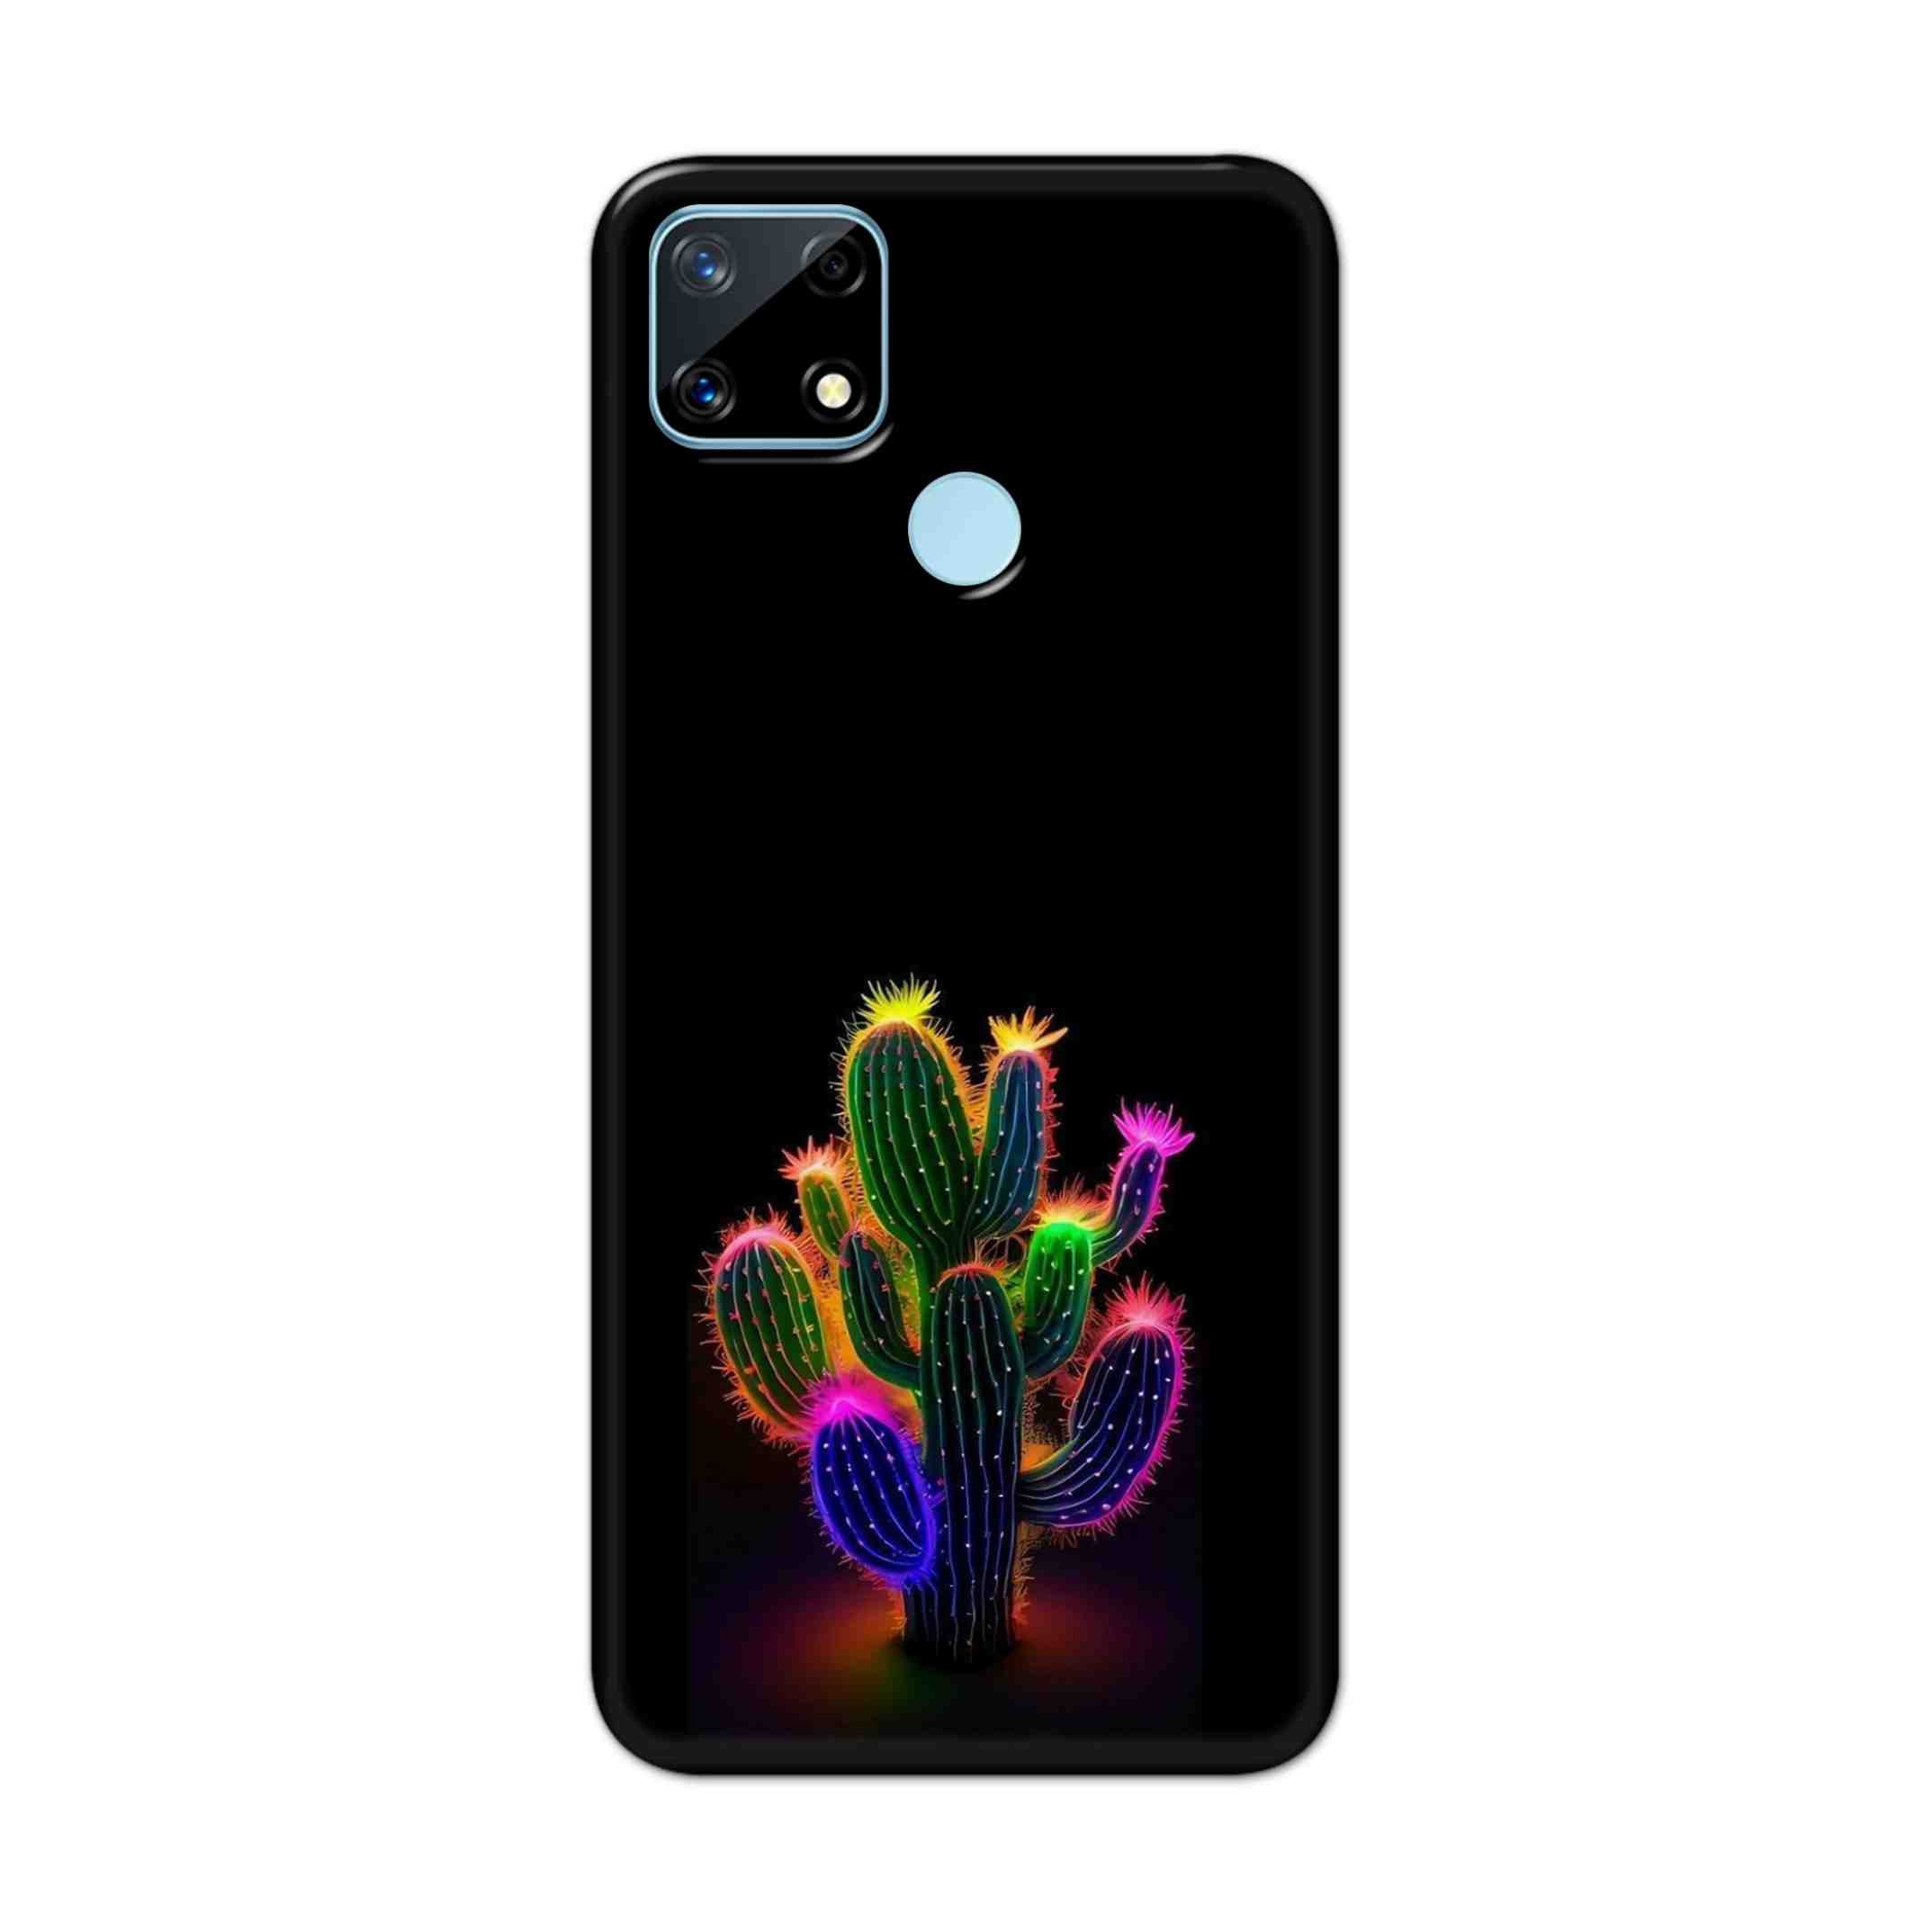 Buy Neon Flower Hard Back Mobile Phone Case Cover For Realme Narzo 20 Online